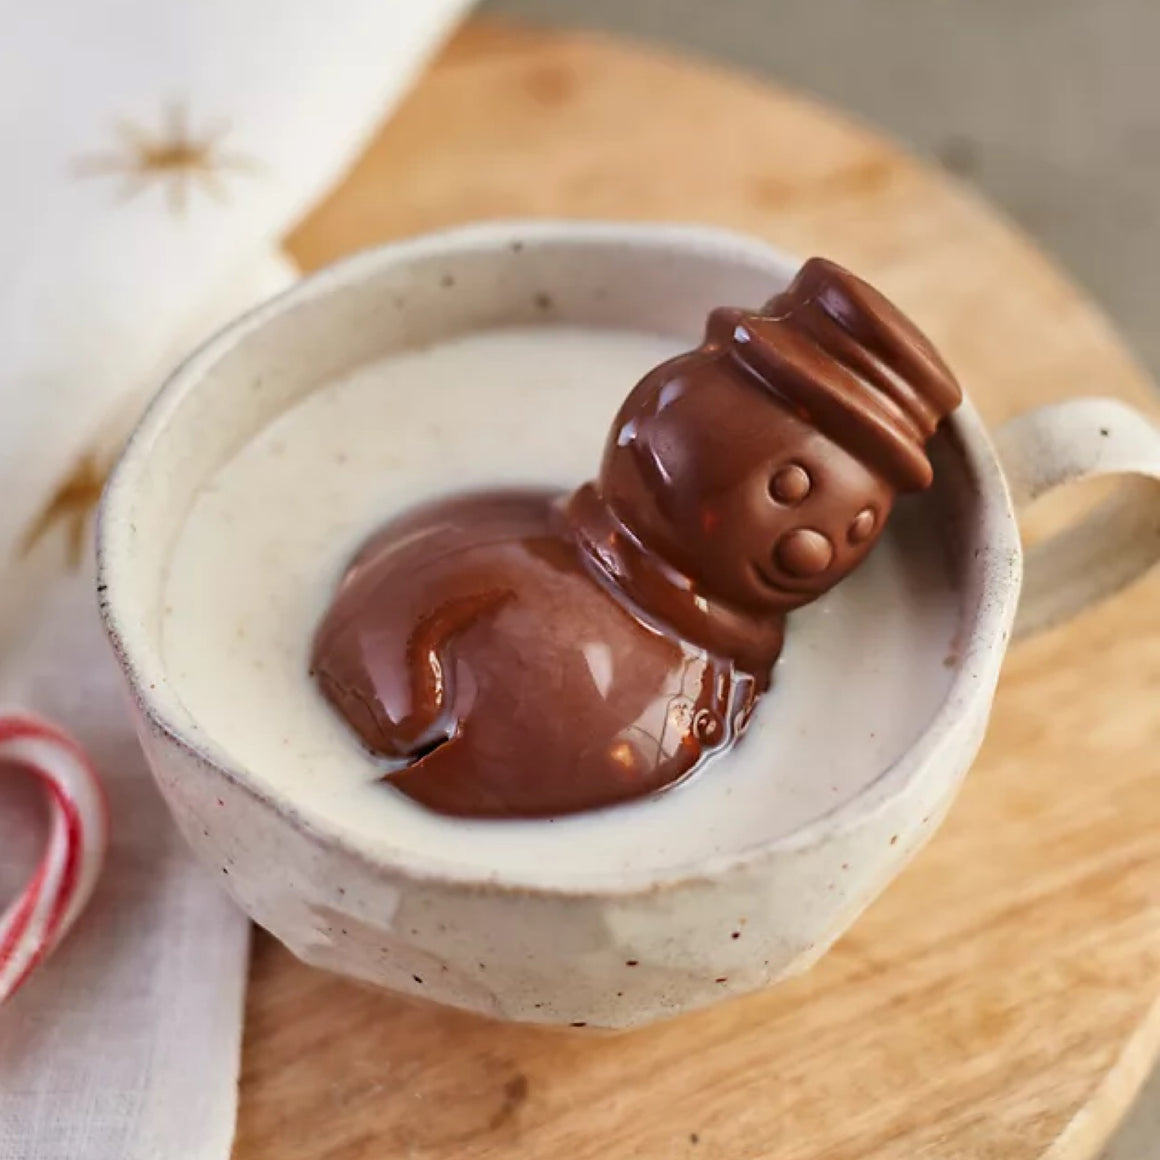 ARTISANAL CONFECTIONS - MELTING HOT CHOCOLATE SNOWMAN WITH MINI MARSHMALLOWS